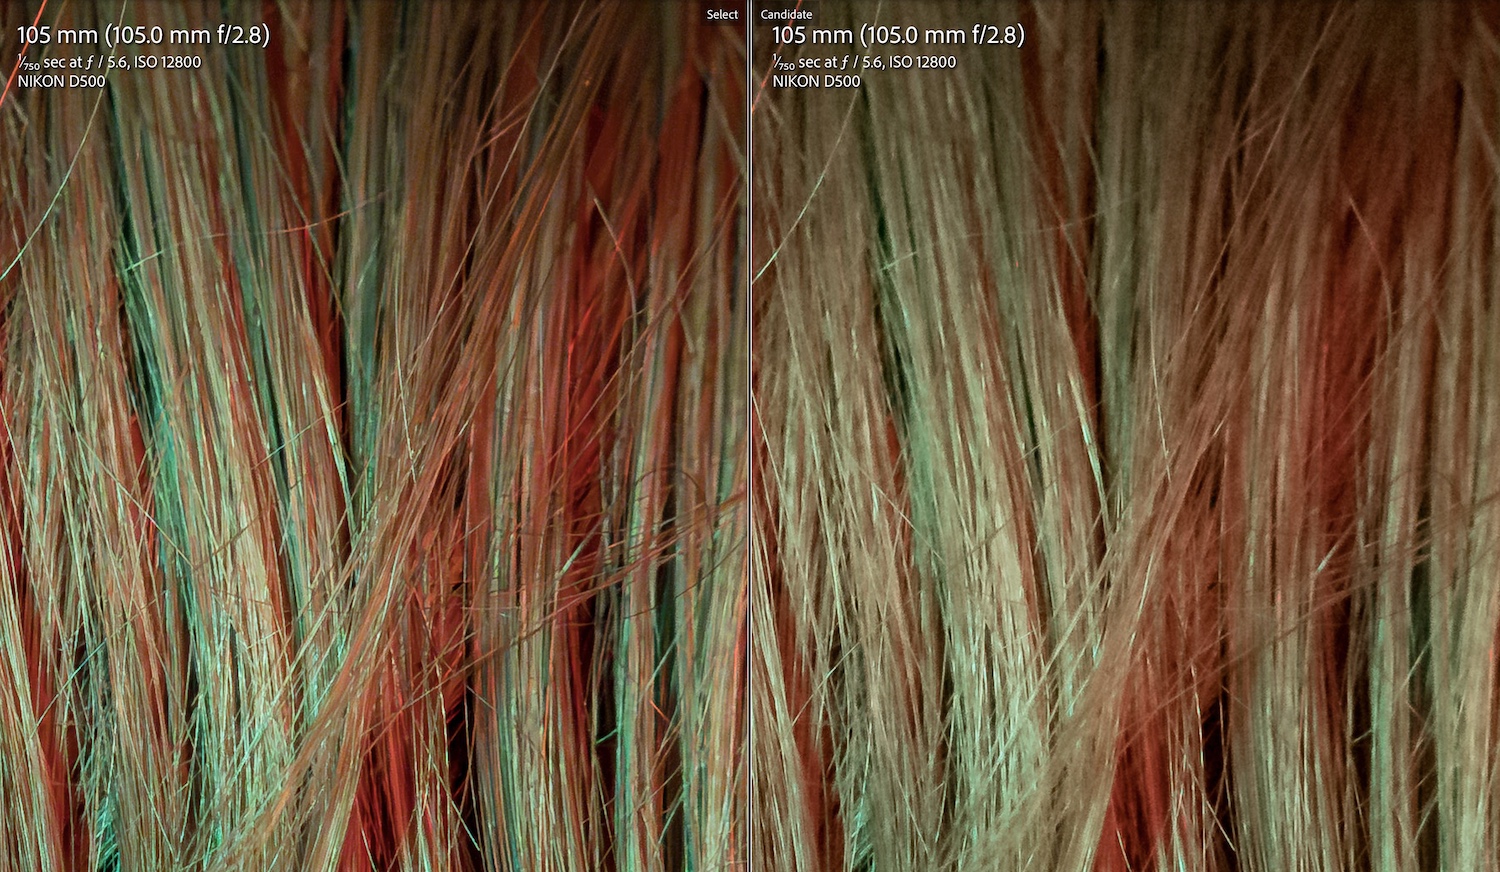 Lightroom's AI-Powered Denoise Feature: close-up showing the details in a child's haircut.